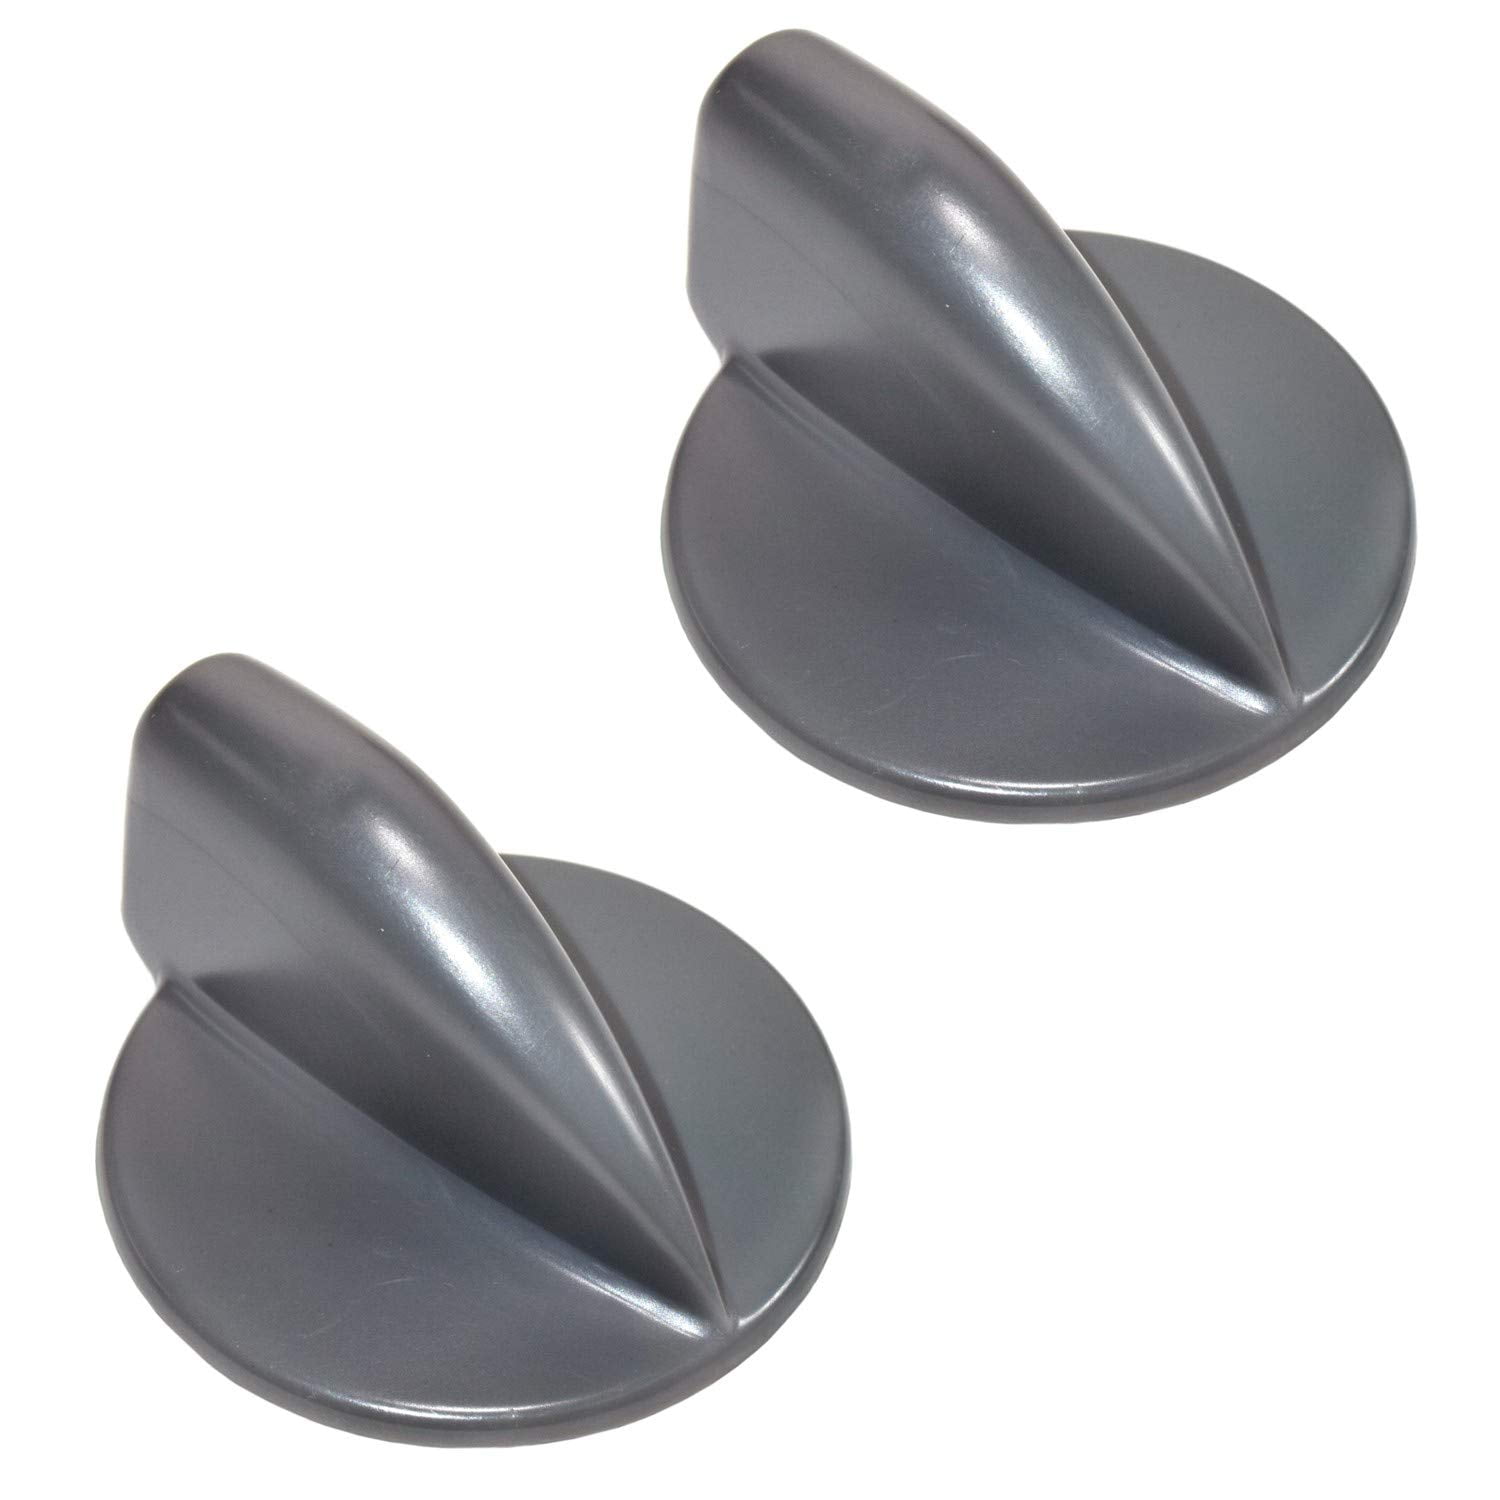 2 Pack 8182050 Fits Whirlpool Washer Control Knob WP8182050 PS885408 